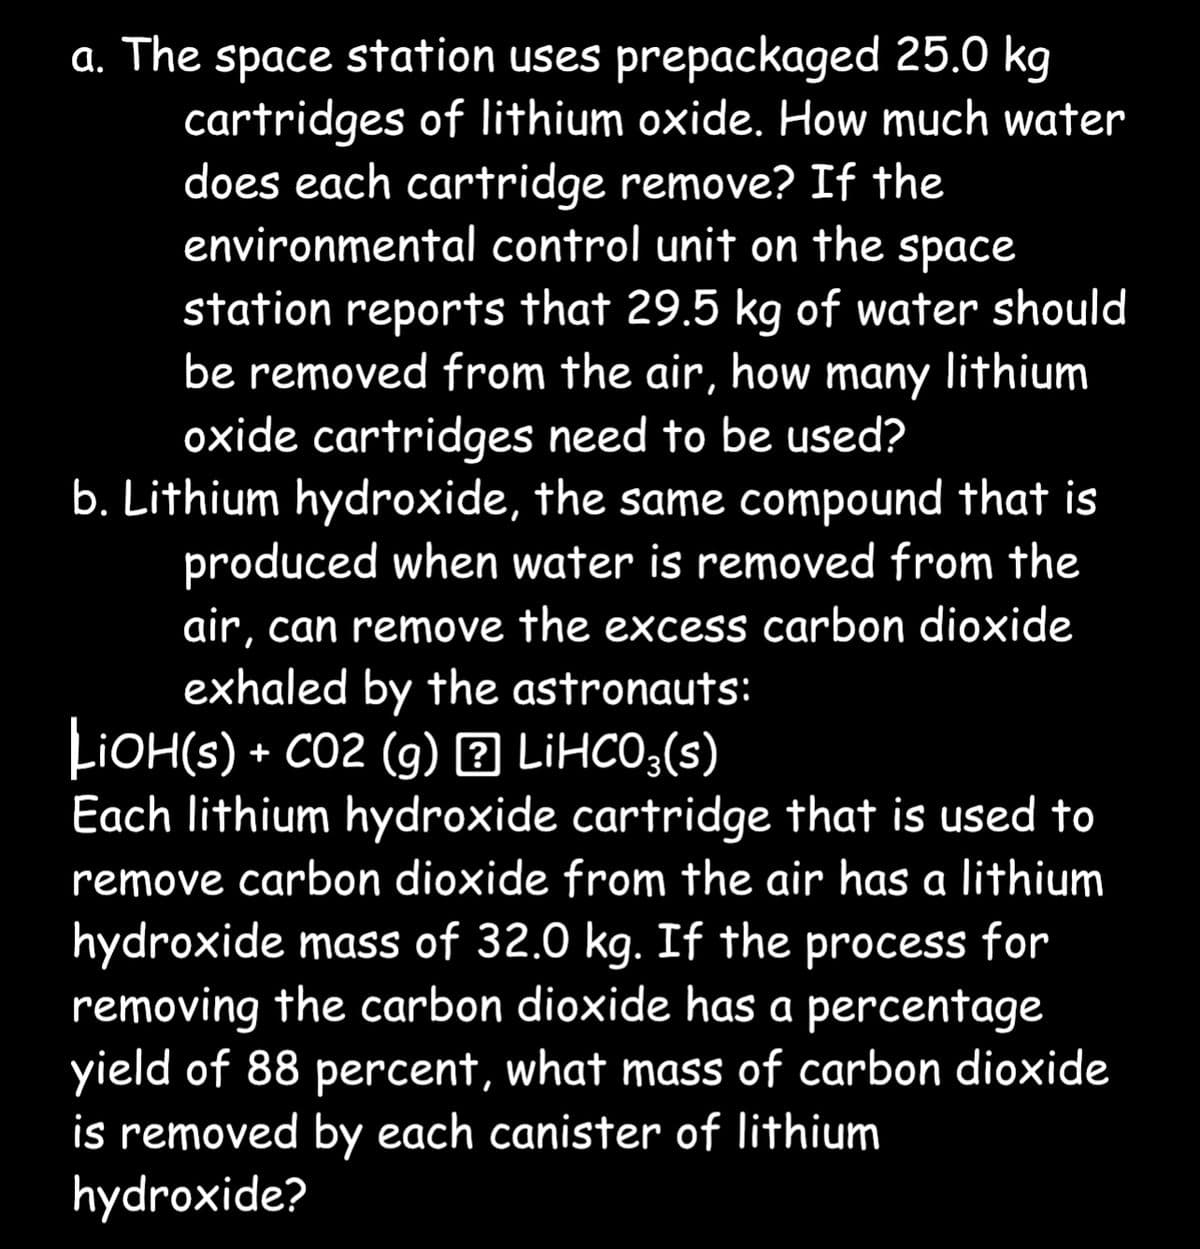 a. The space station uses prepackaged 25.0 kg
cartridges of lithium oxide. How much water
does each cartridge remove? If the
environmental control unit on the space
station reports that 29.5 kg of water should
be removed from the air, how many lithium
oxide cartridges need to be used?
b. Lithium hydroxide, the same compound that is
produced when water is removed from the
air, can remove the excess carbon dioxide
exhaled by the astronauts:
LiOH(s) + CO2 (g) ? LiHCO3(s)
Each lithium hydroxide cartridge that is used to
remove carbon dioxide from the air has a lithium
hydroxide mass of 32.0 kg. If the process for
removing the carbon dioxide has a percentage
yield of 88 percent, what mass of carbon dioxide
is removed by each canister of lithium
hydroxide?